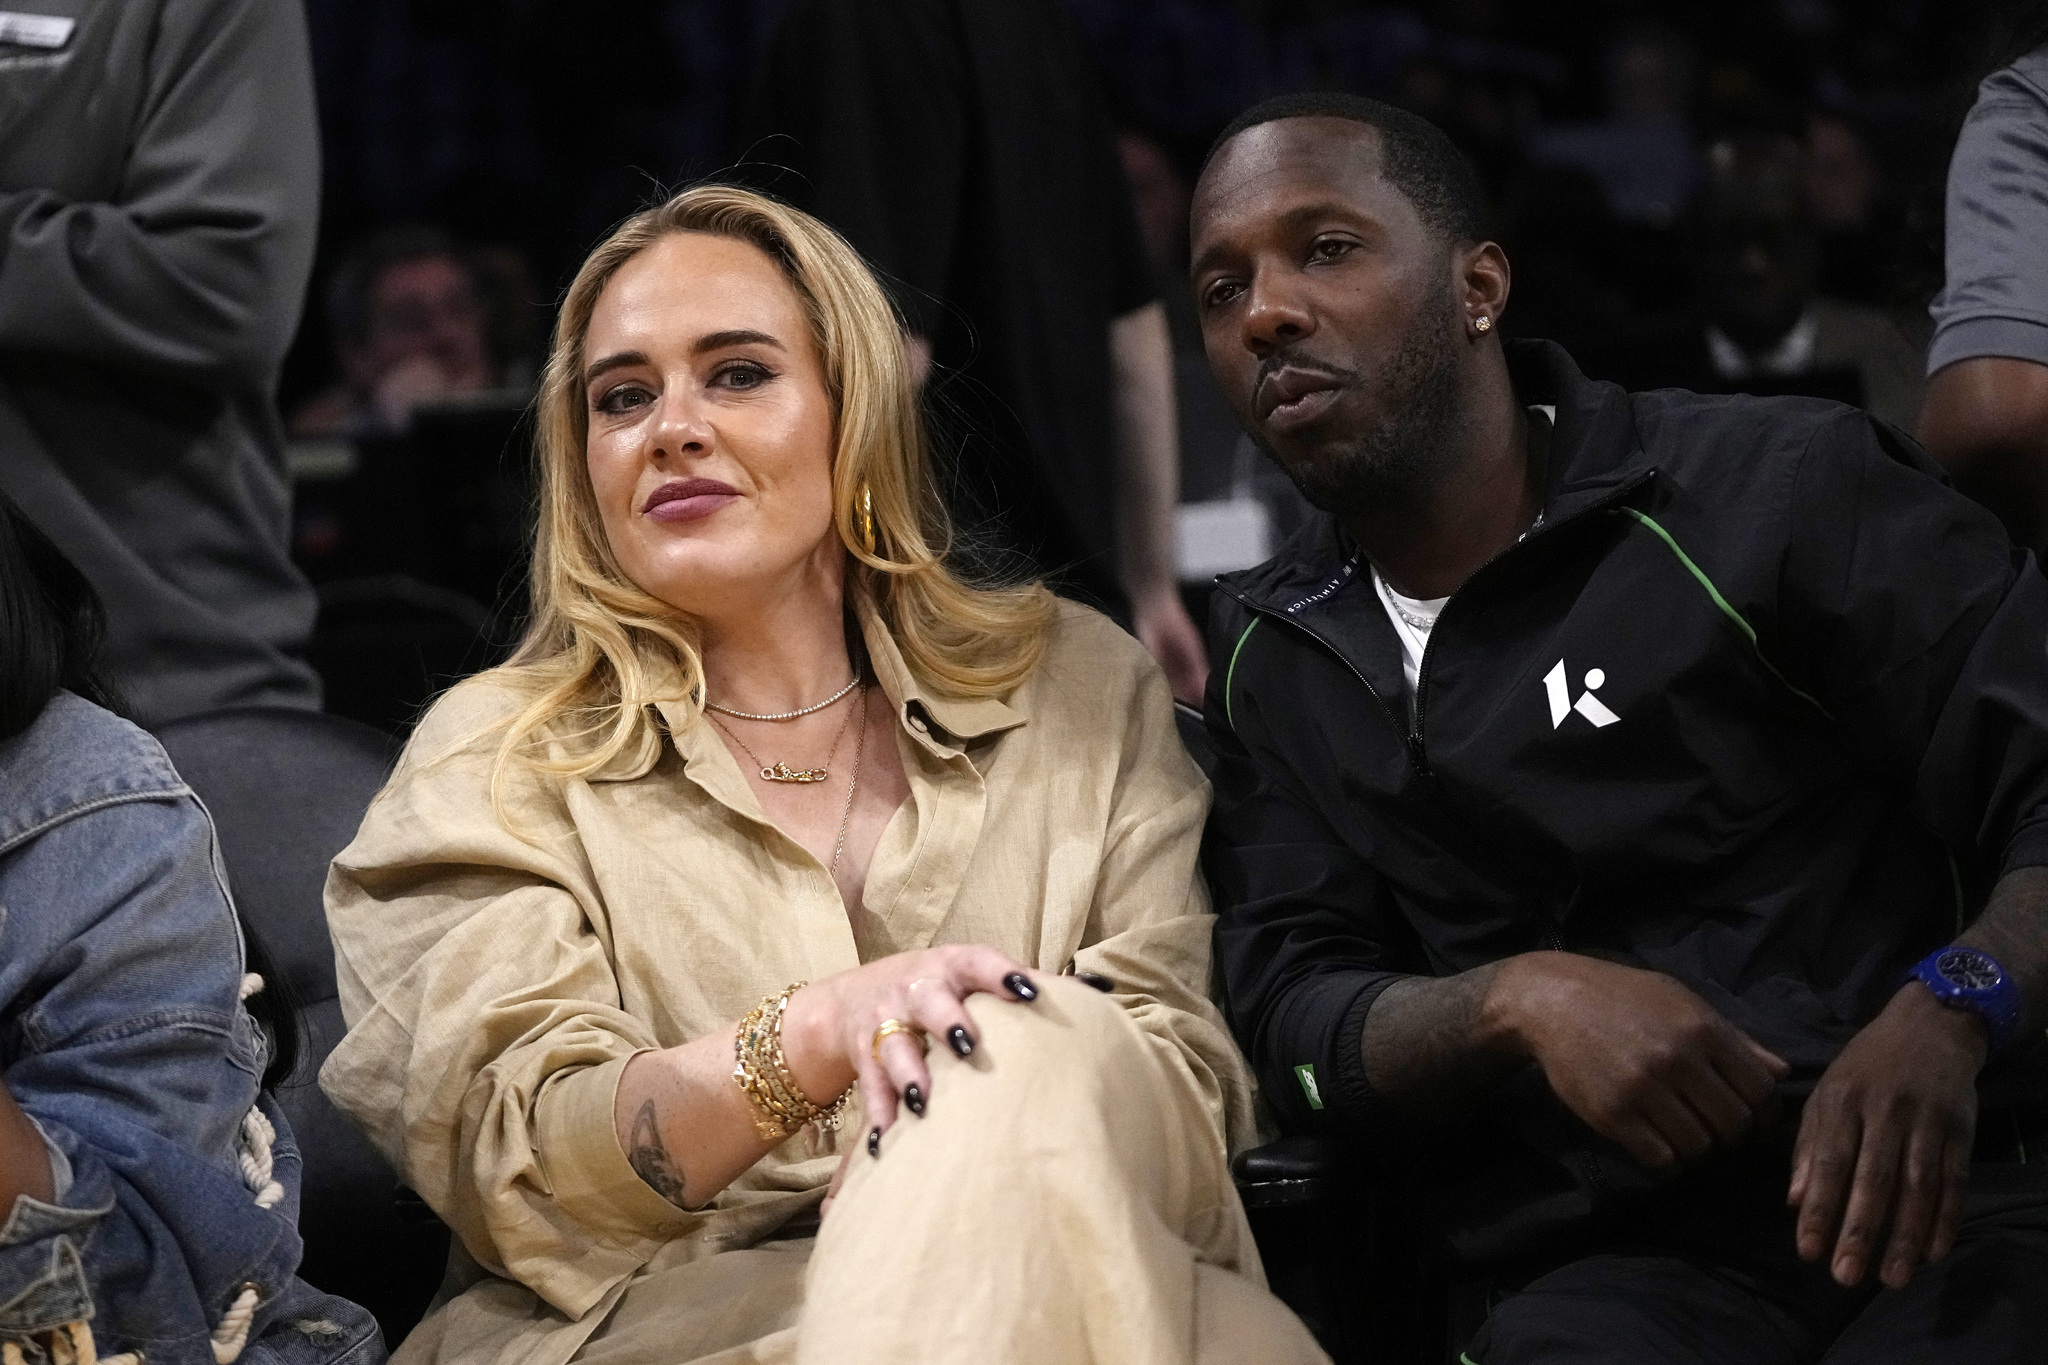 Singer Adele, left, with sports agent Rich Paul